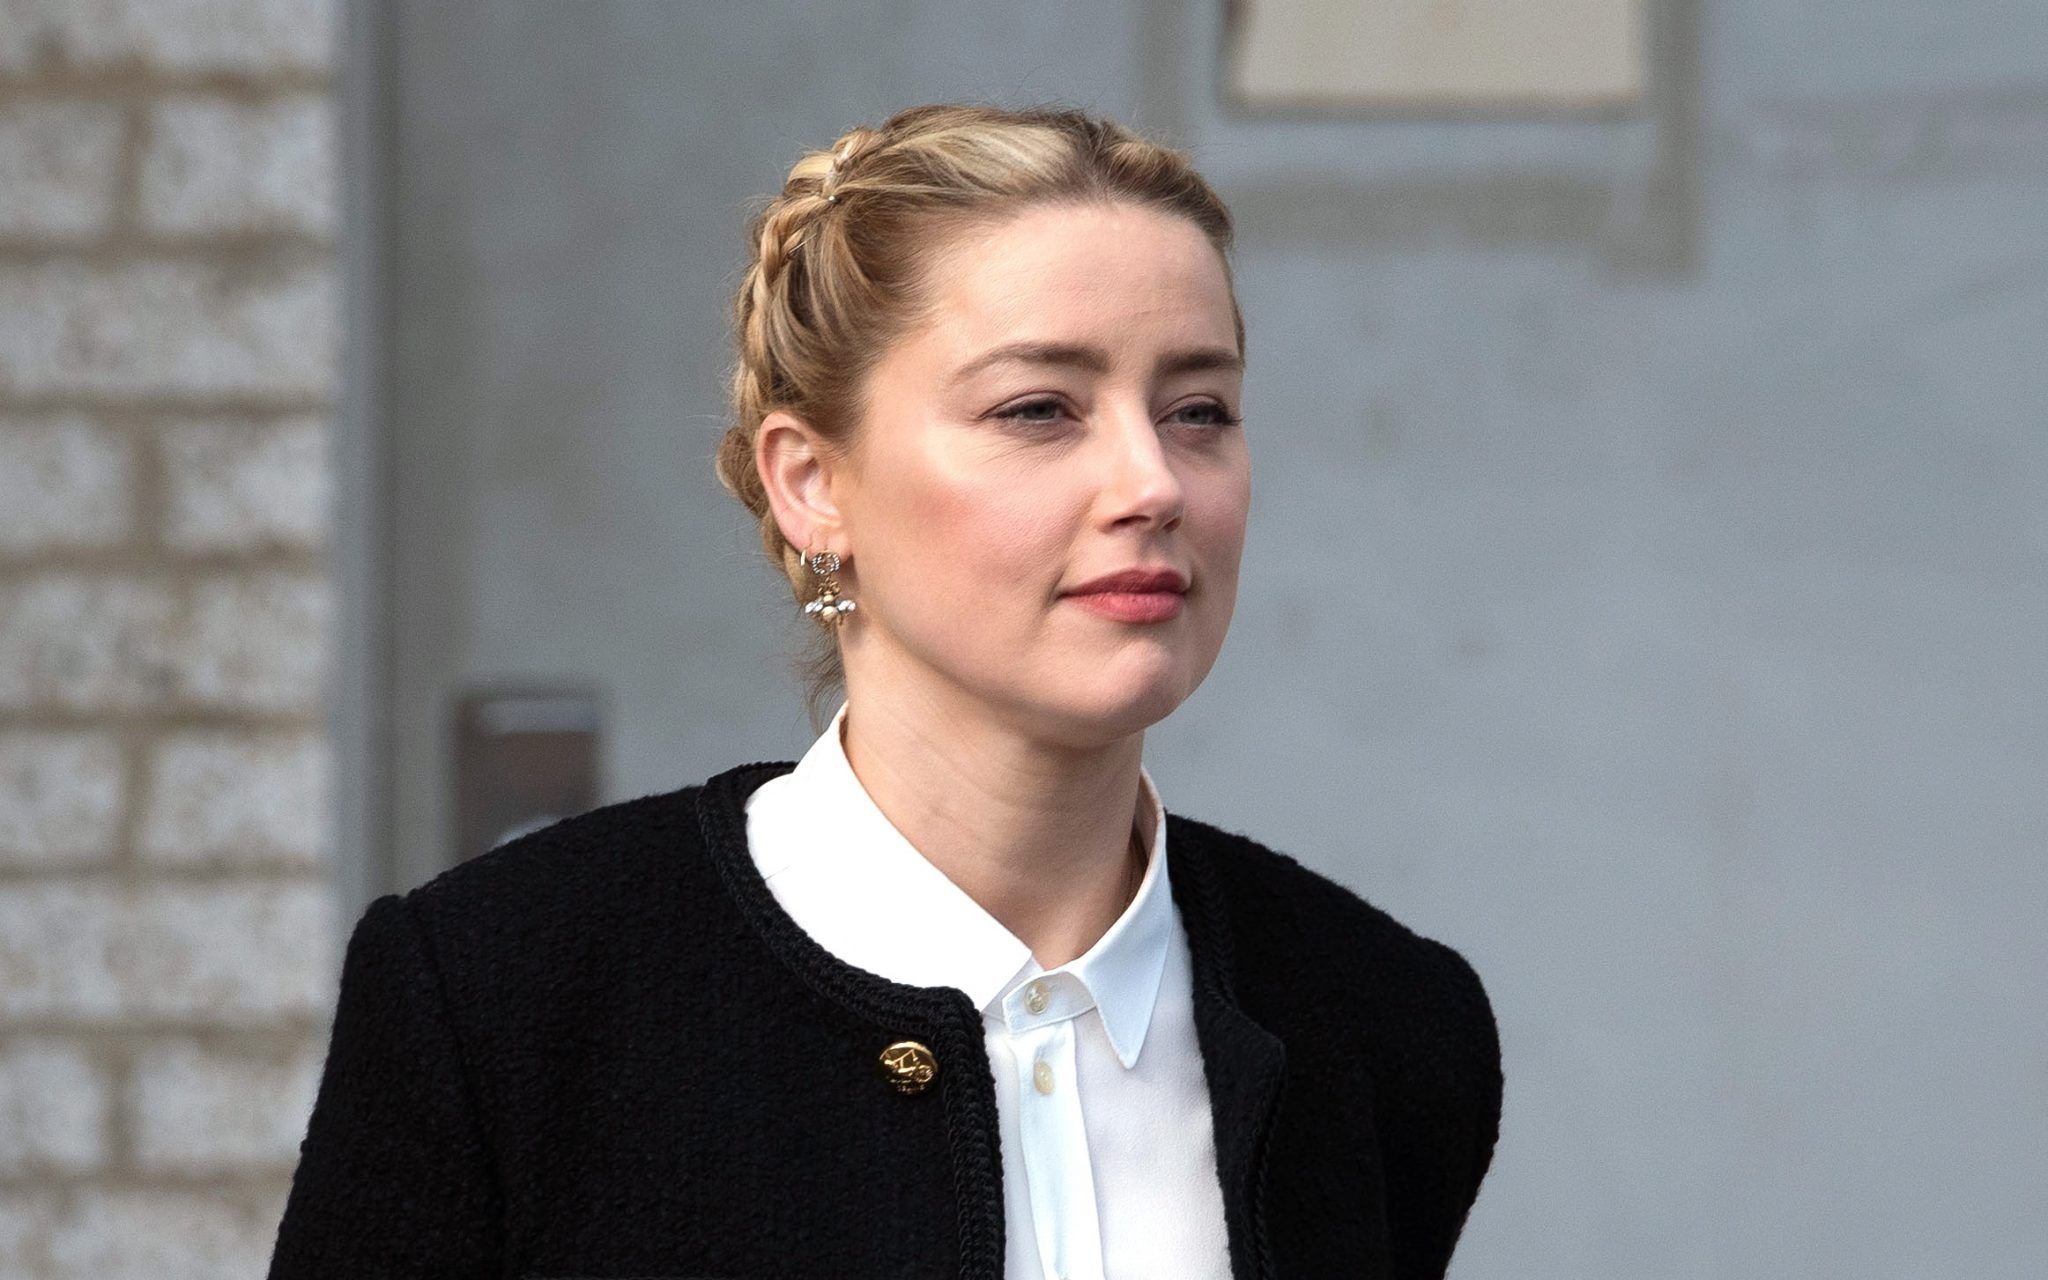 Why don't people believe Amber Heard?